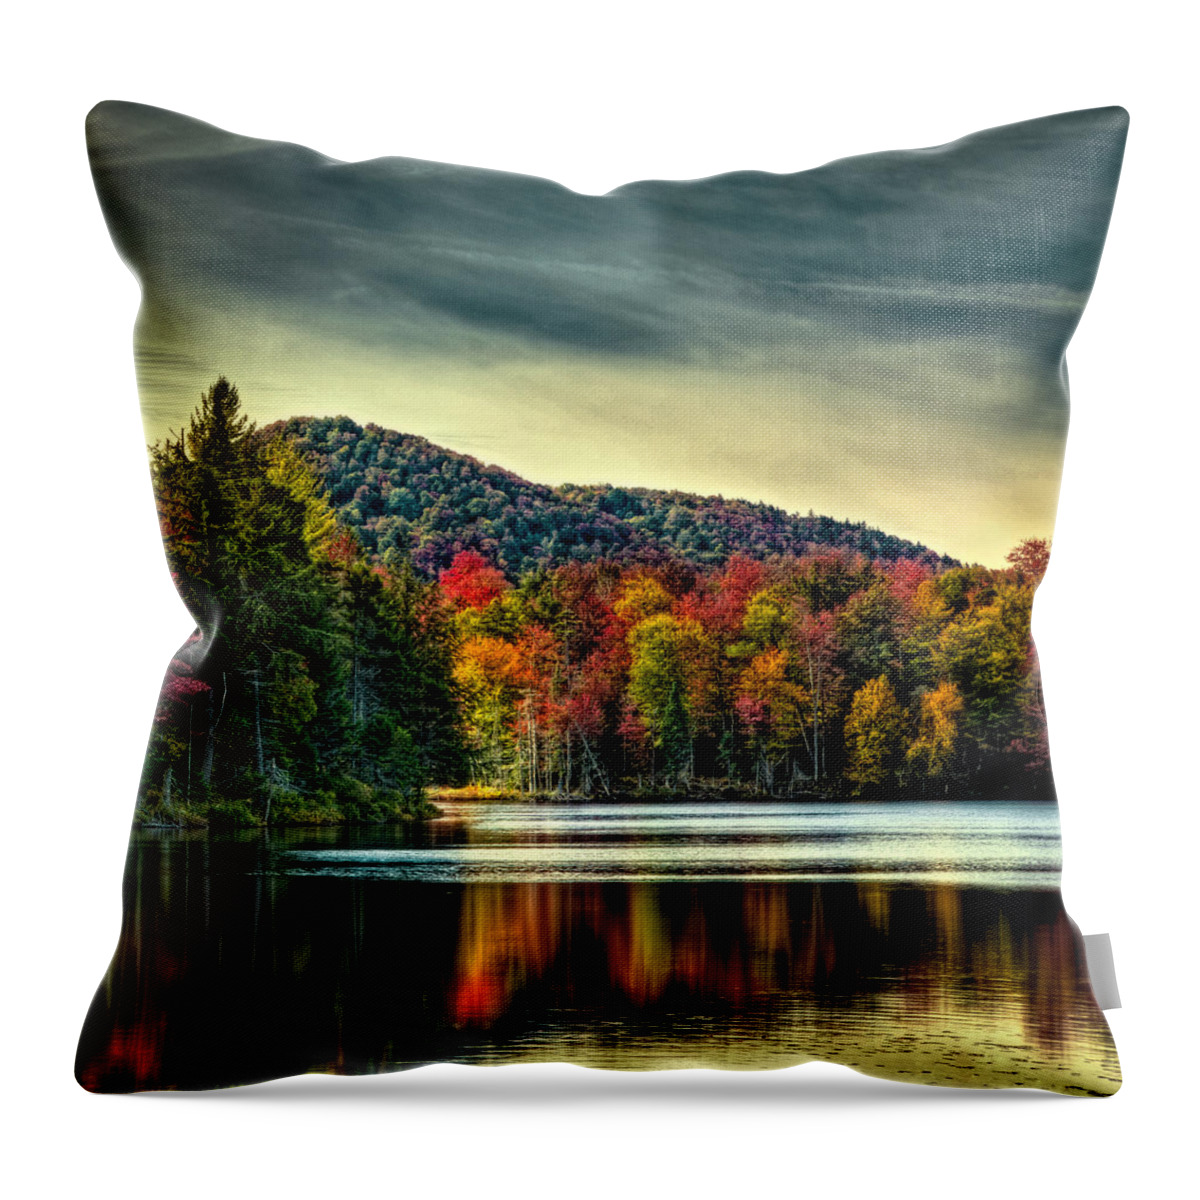 Reflections Of Autumn On West Lake Throw Pillow featuring the photograph Reflections of Autumn on West Lake by David Patterson